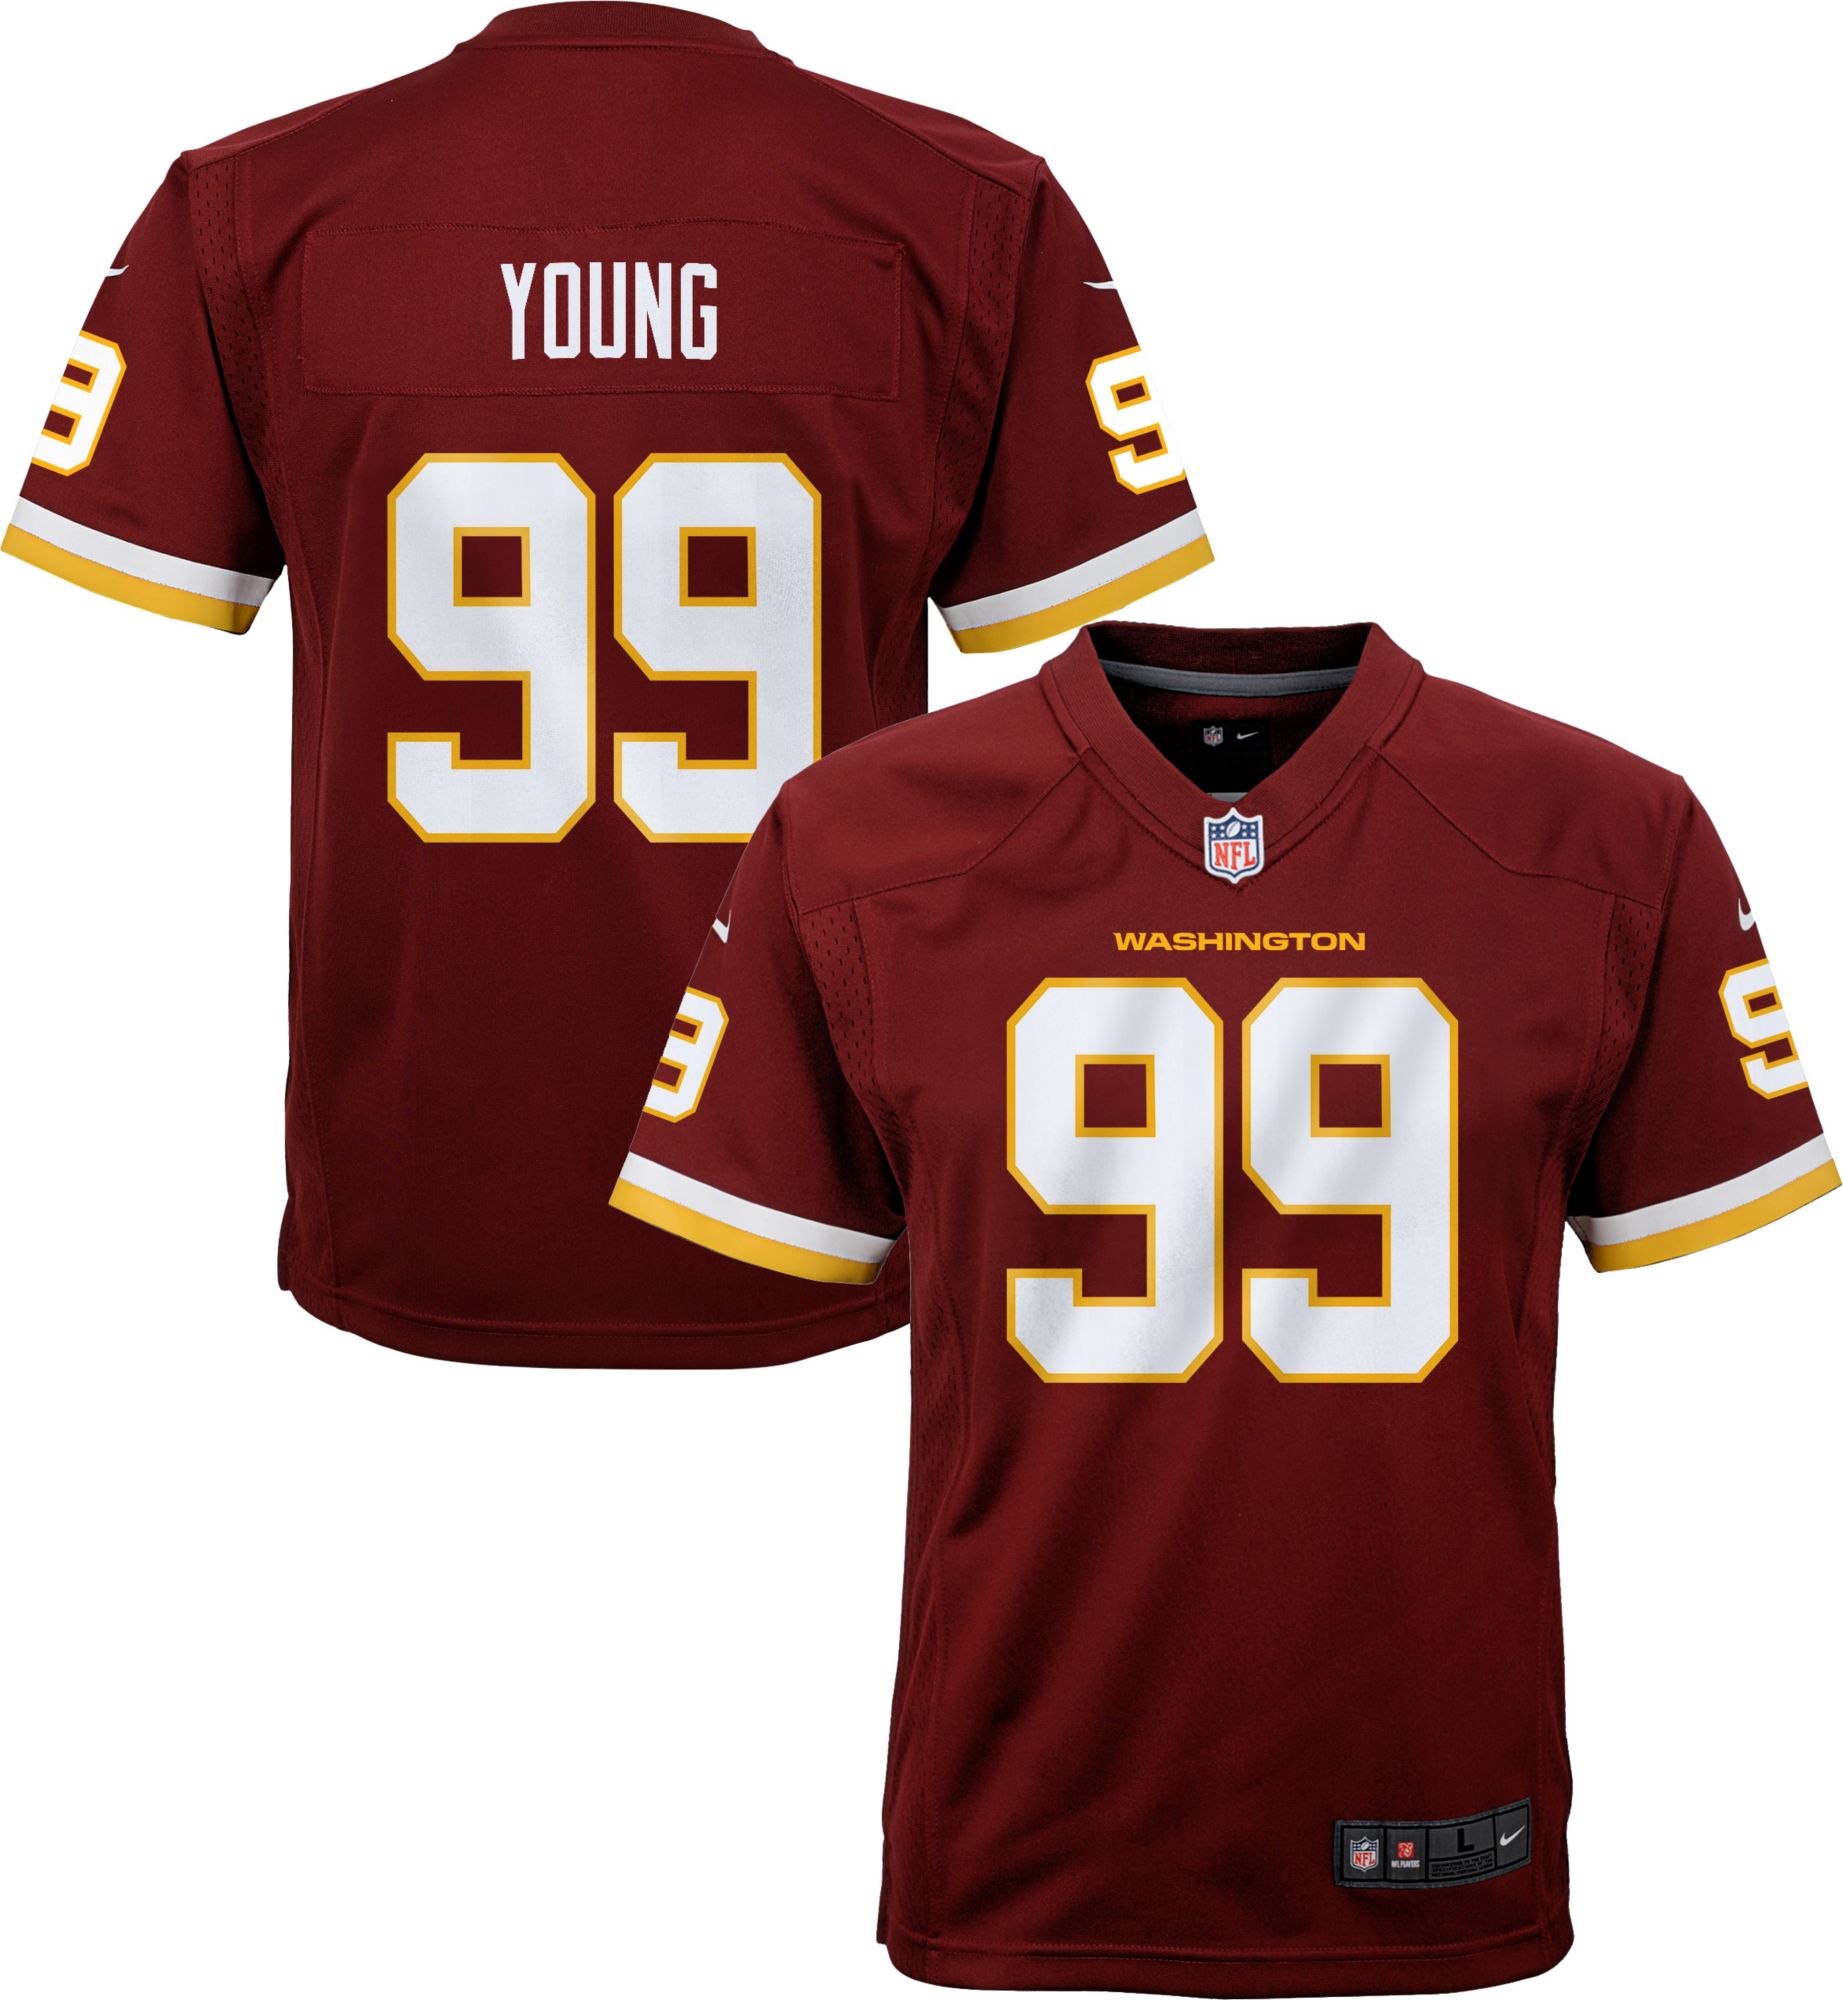 chase young jersey 99